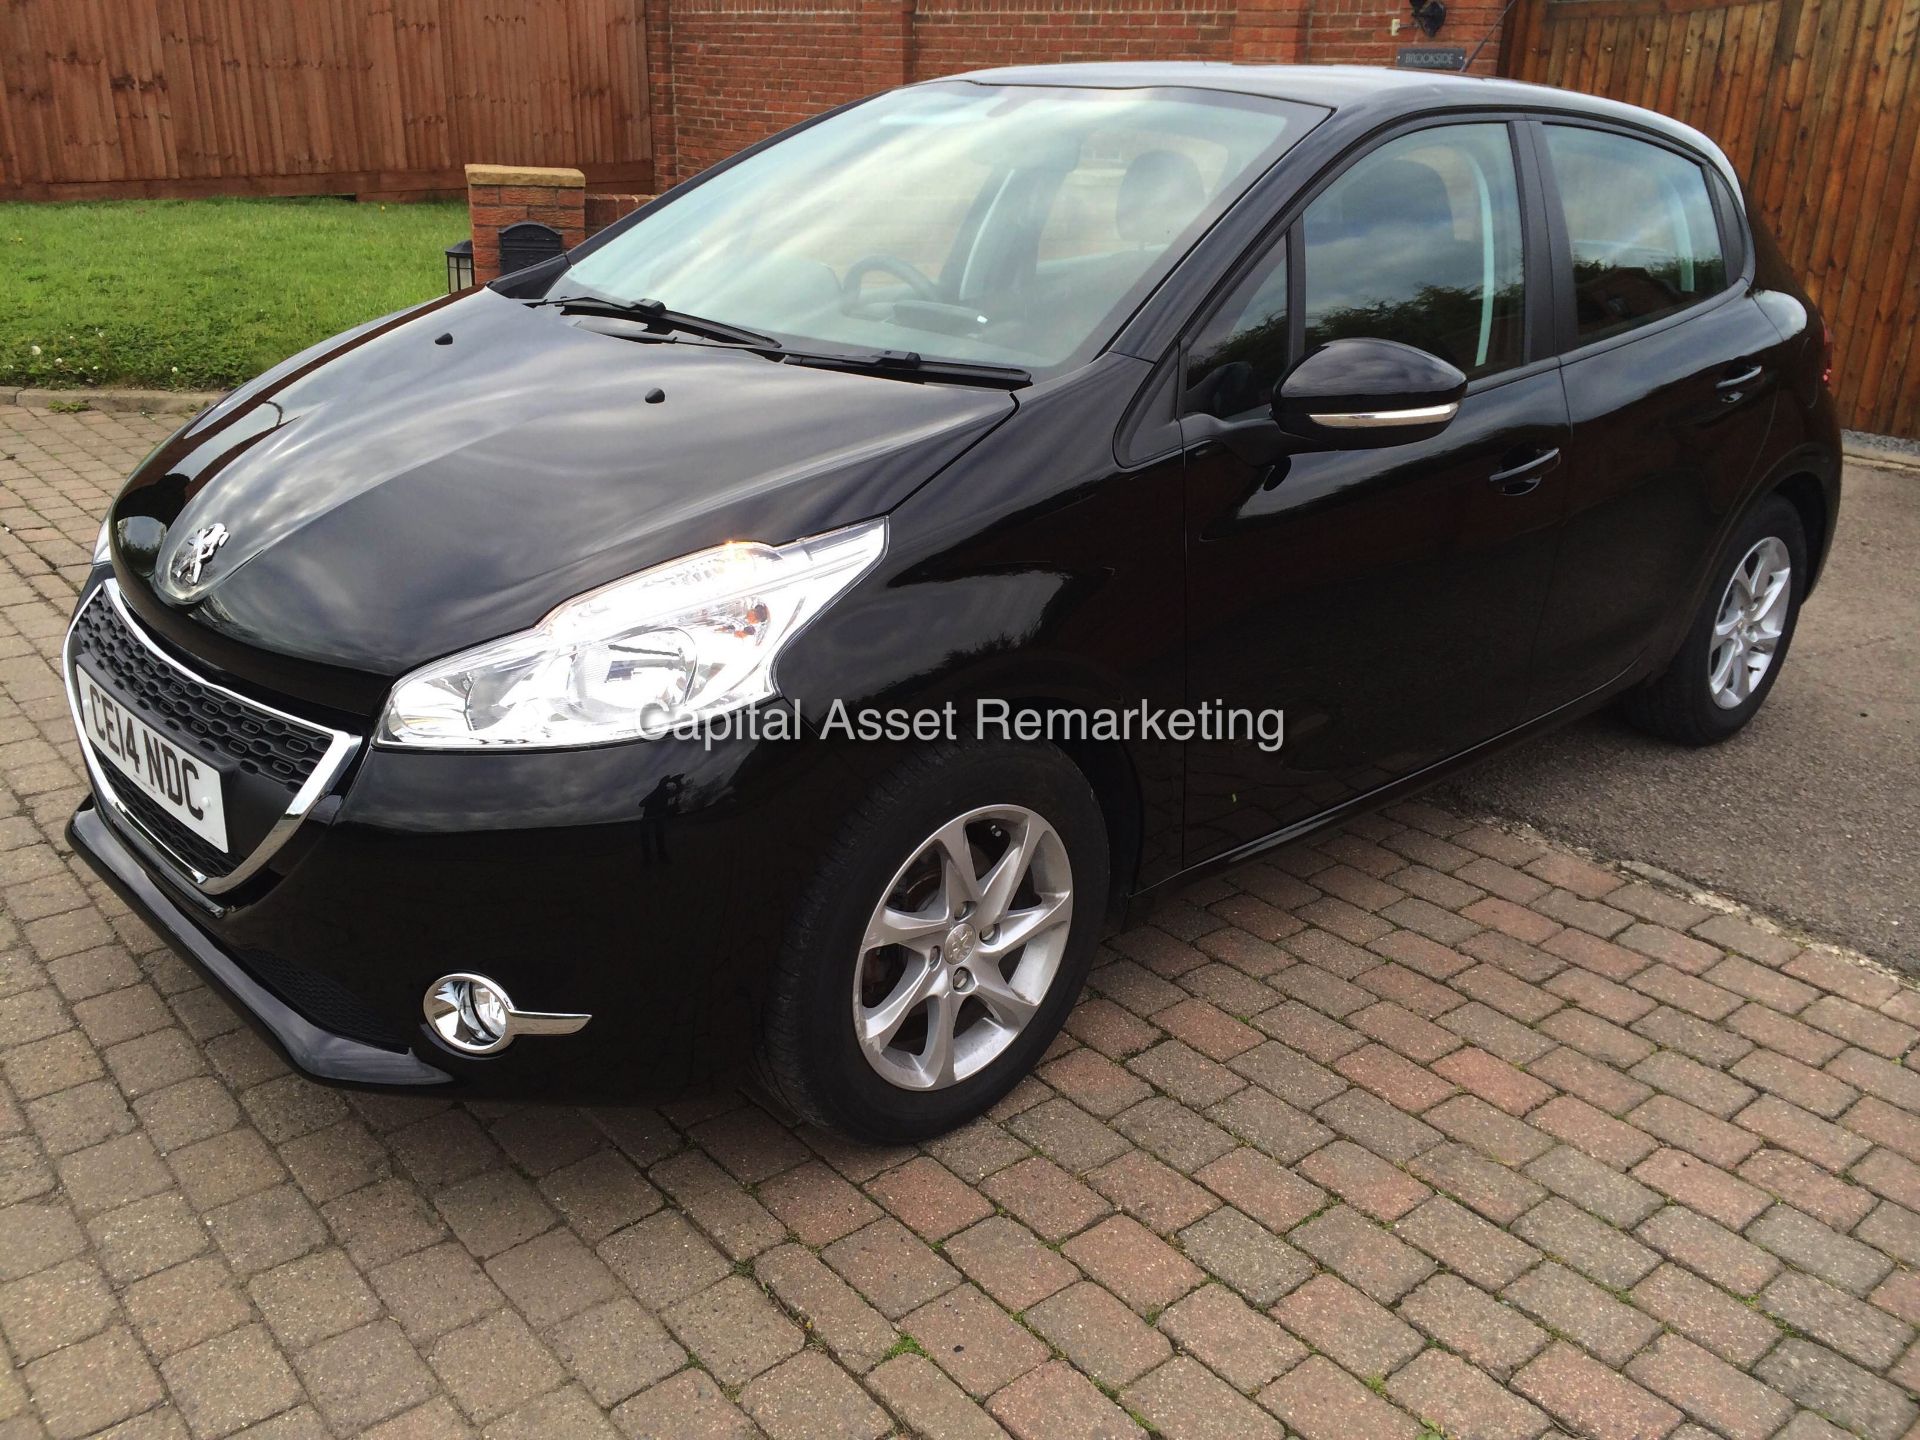 PEUGEOT 208 1.4 HDI 'ACTIVE' 5 DOOR (2014 - 14 REG)  **OWNED BY PEUGEOT FROM NEW** - Image 3 of 15